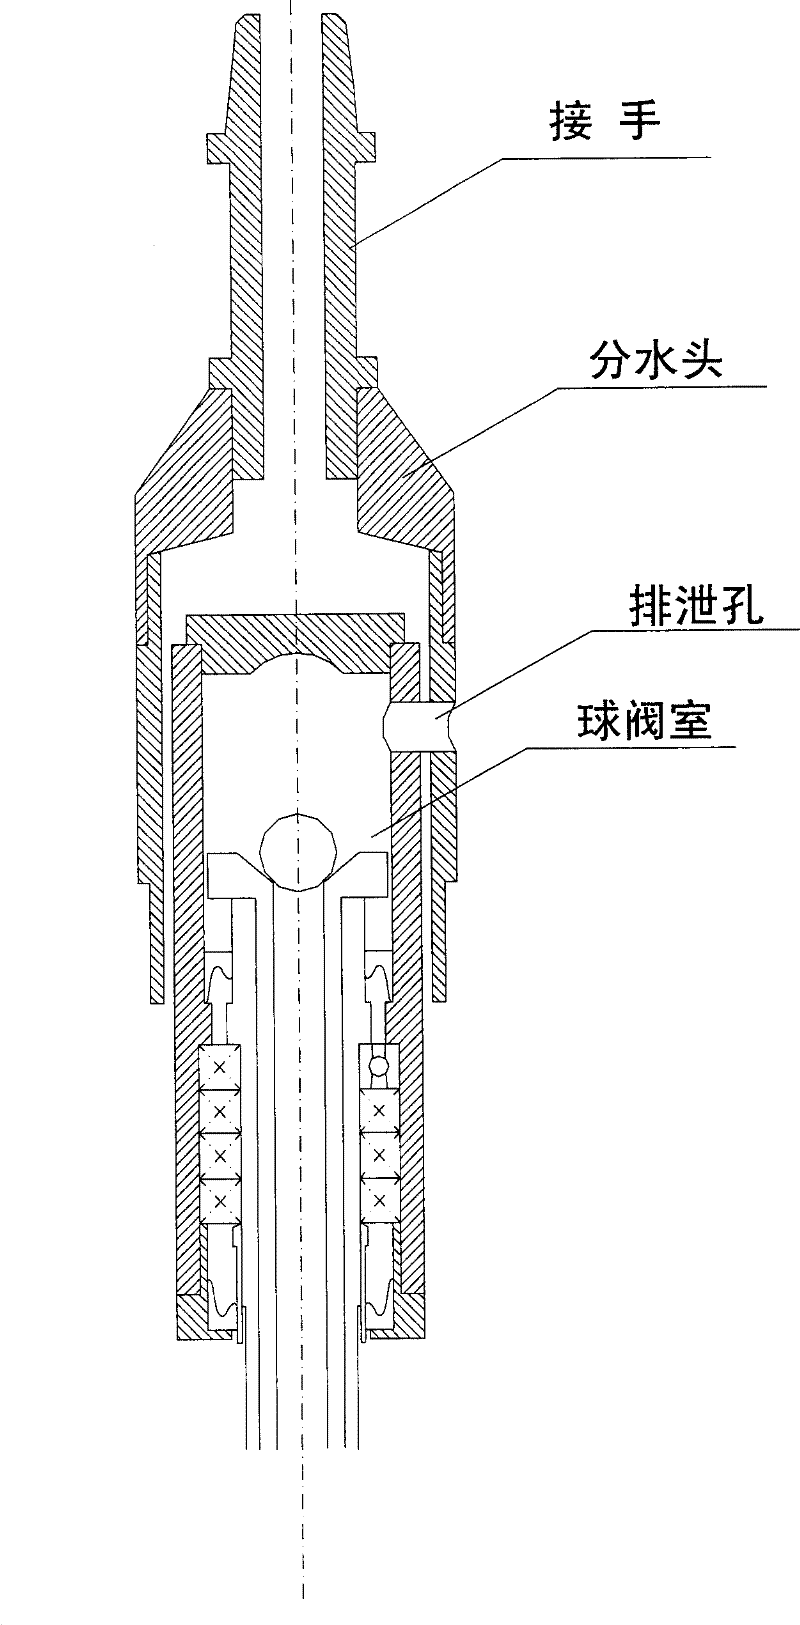 Double-tubes single-action valve type coring earth borrowing device